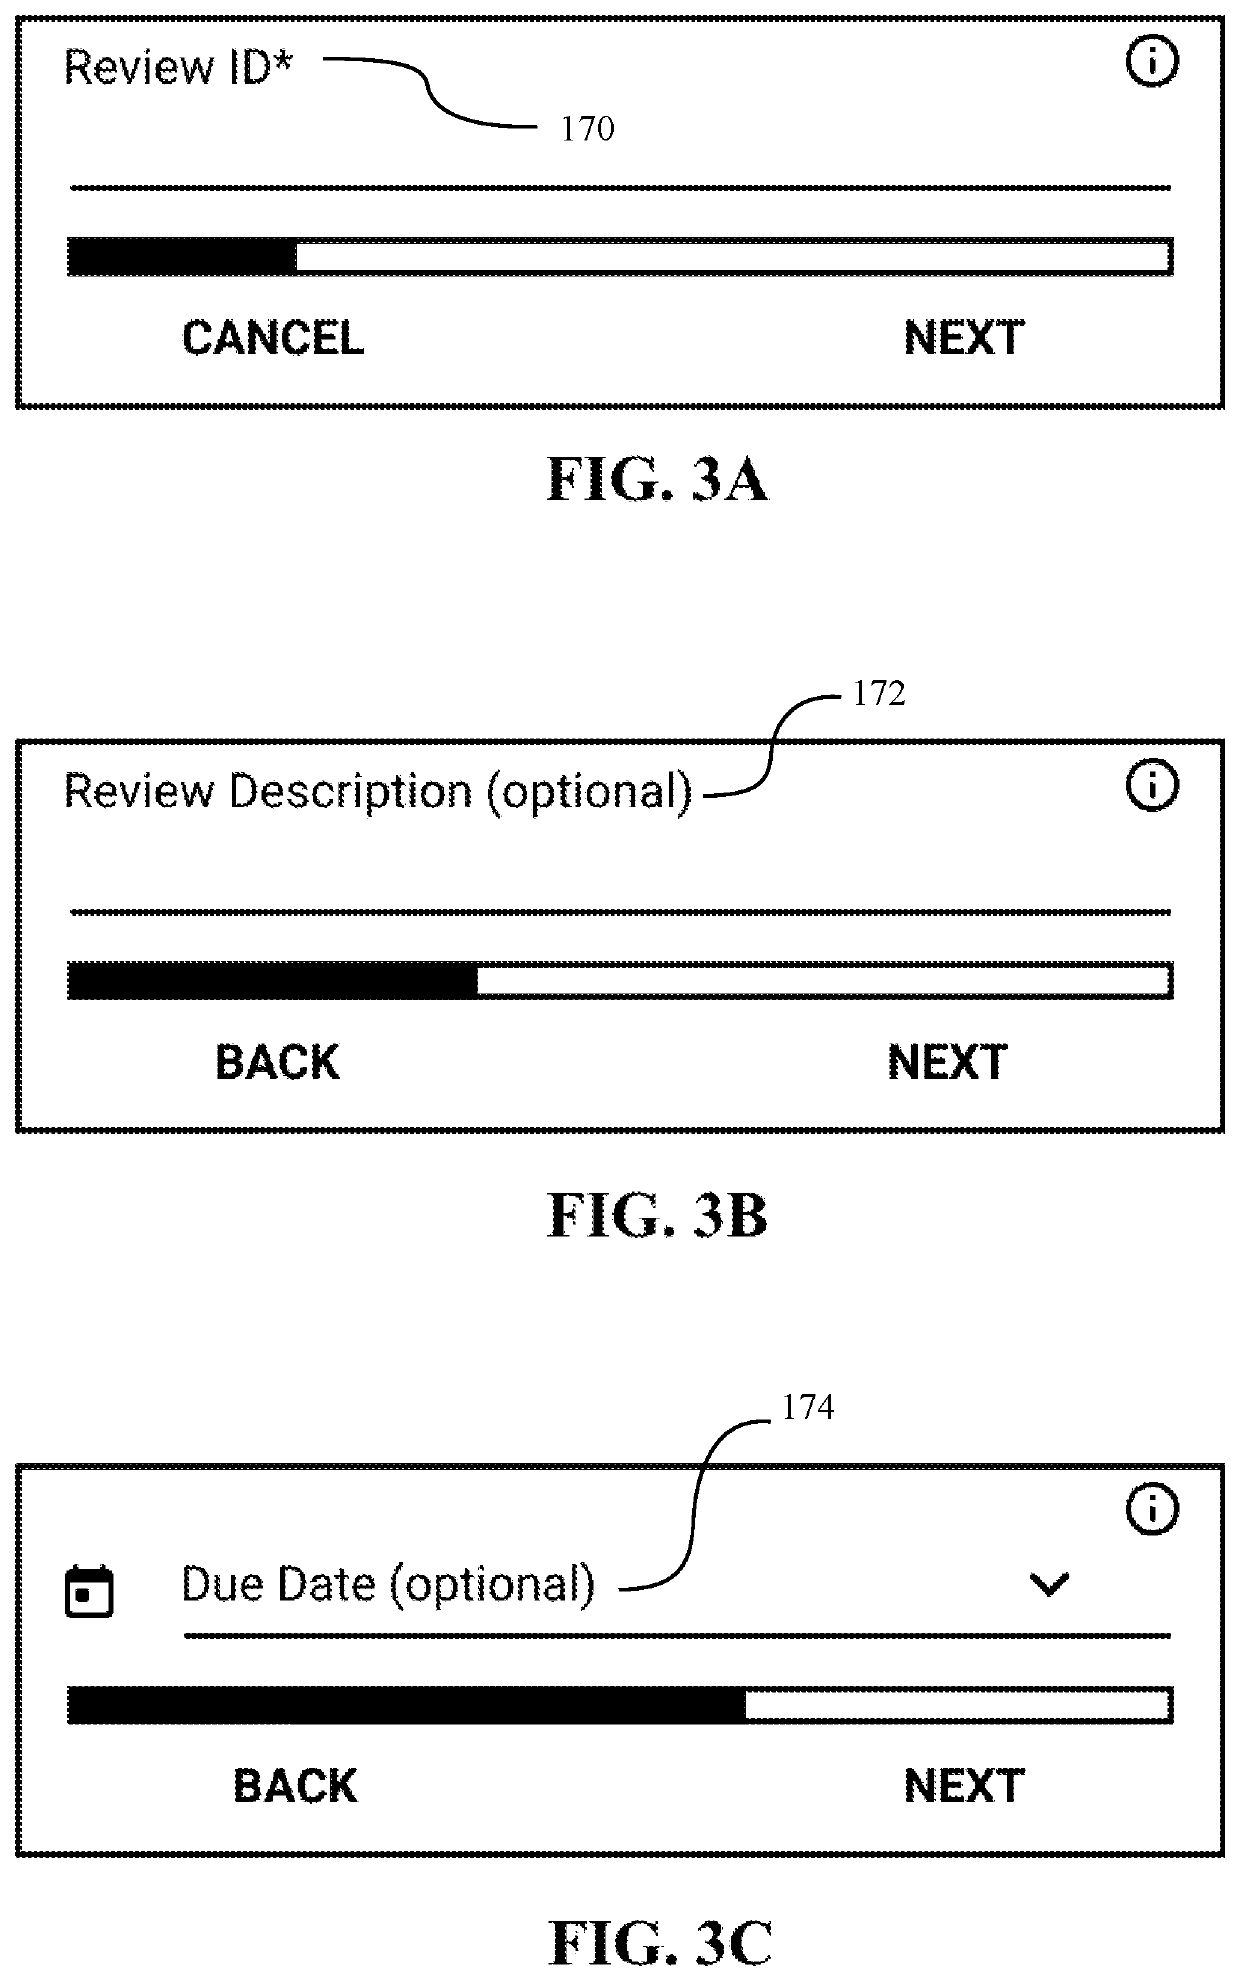 Management systems and methods for claim-based patent analysis